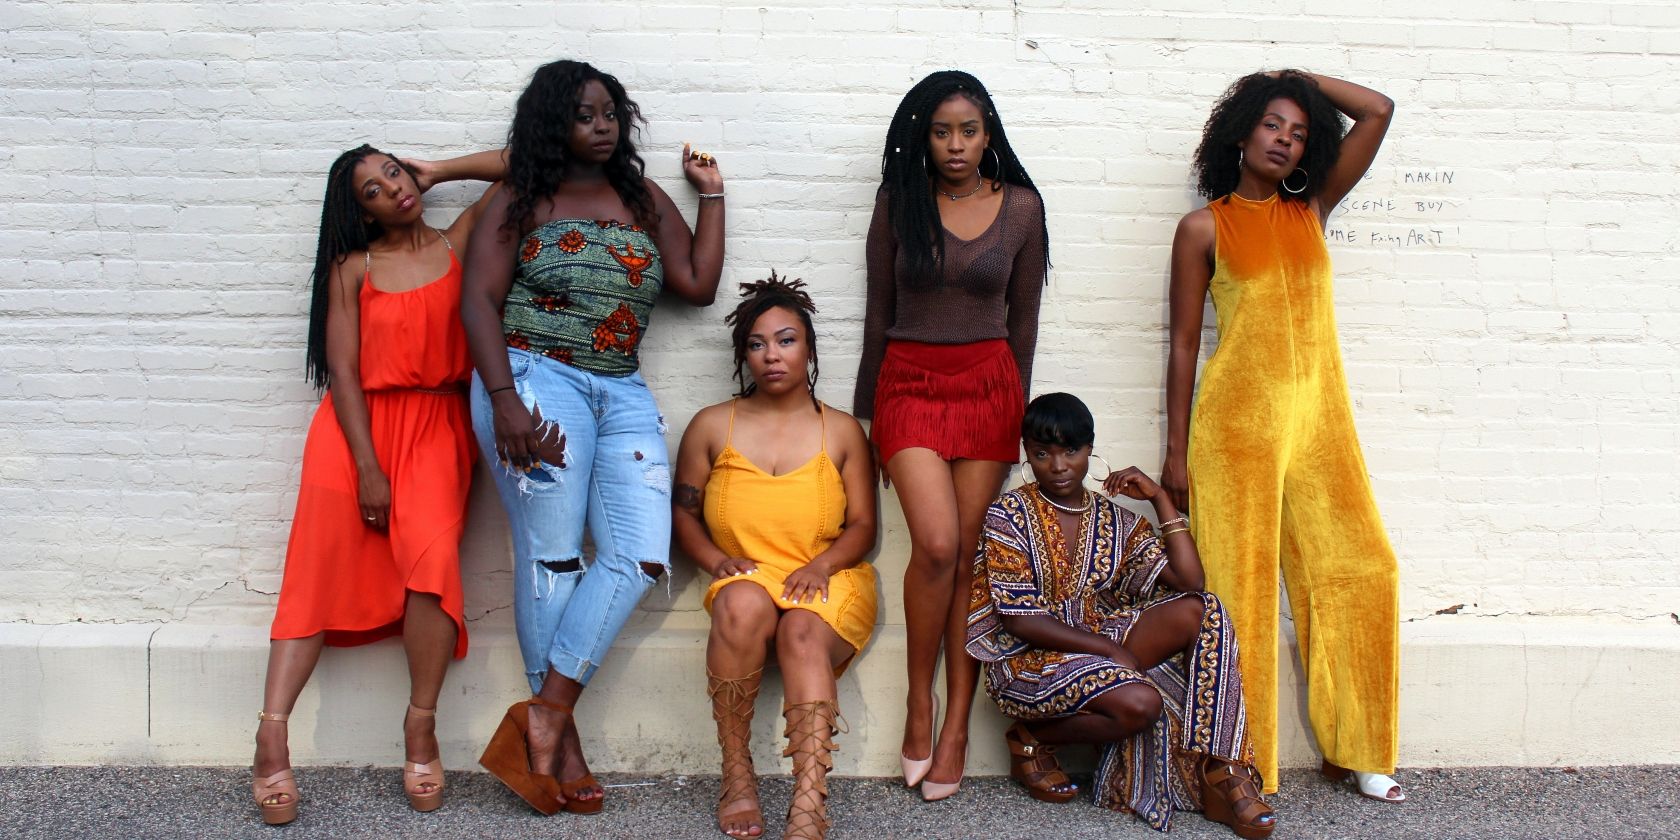 black women against white wall in colorful clothing